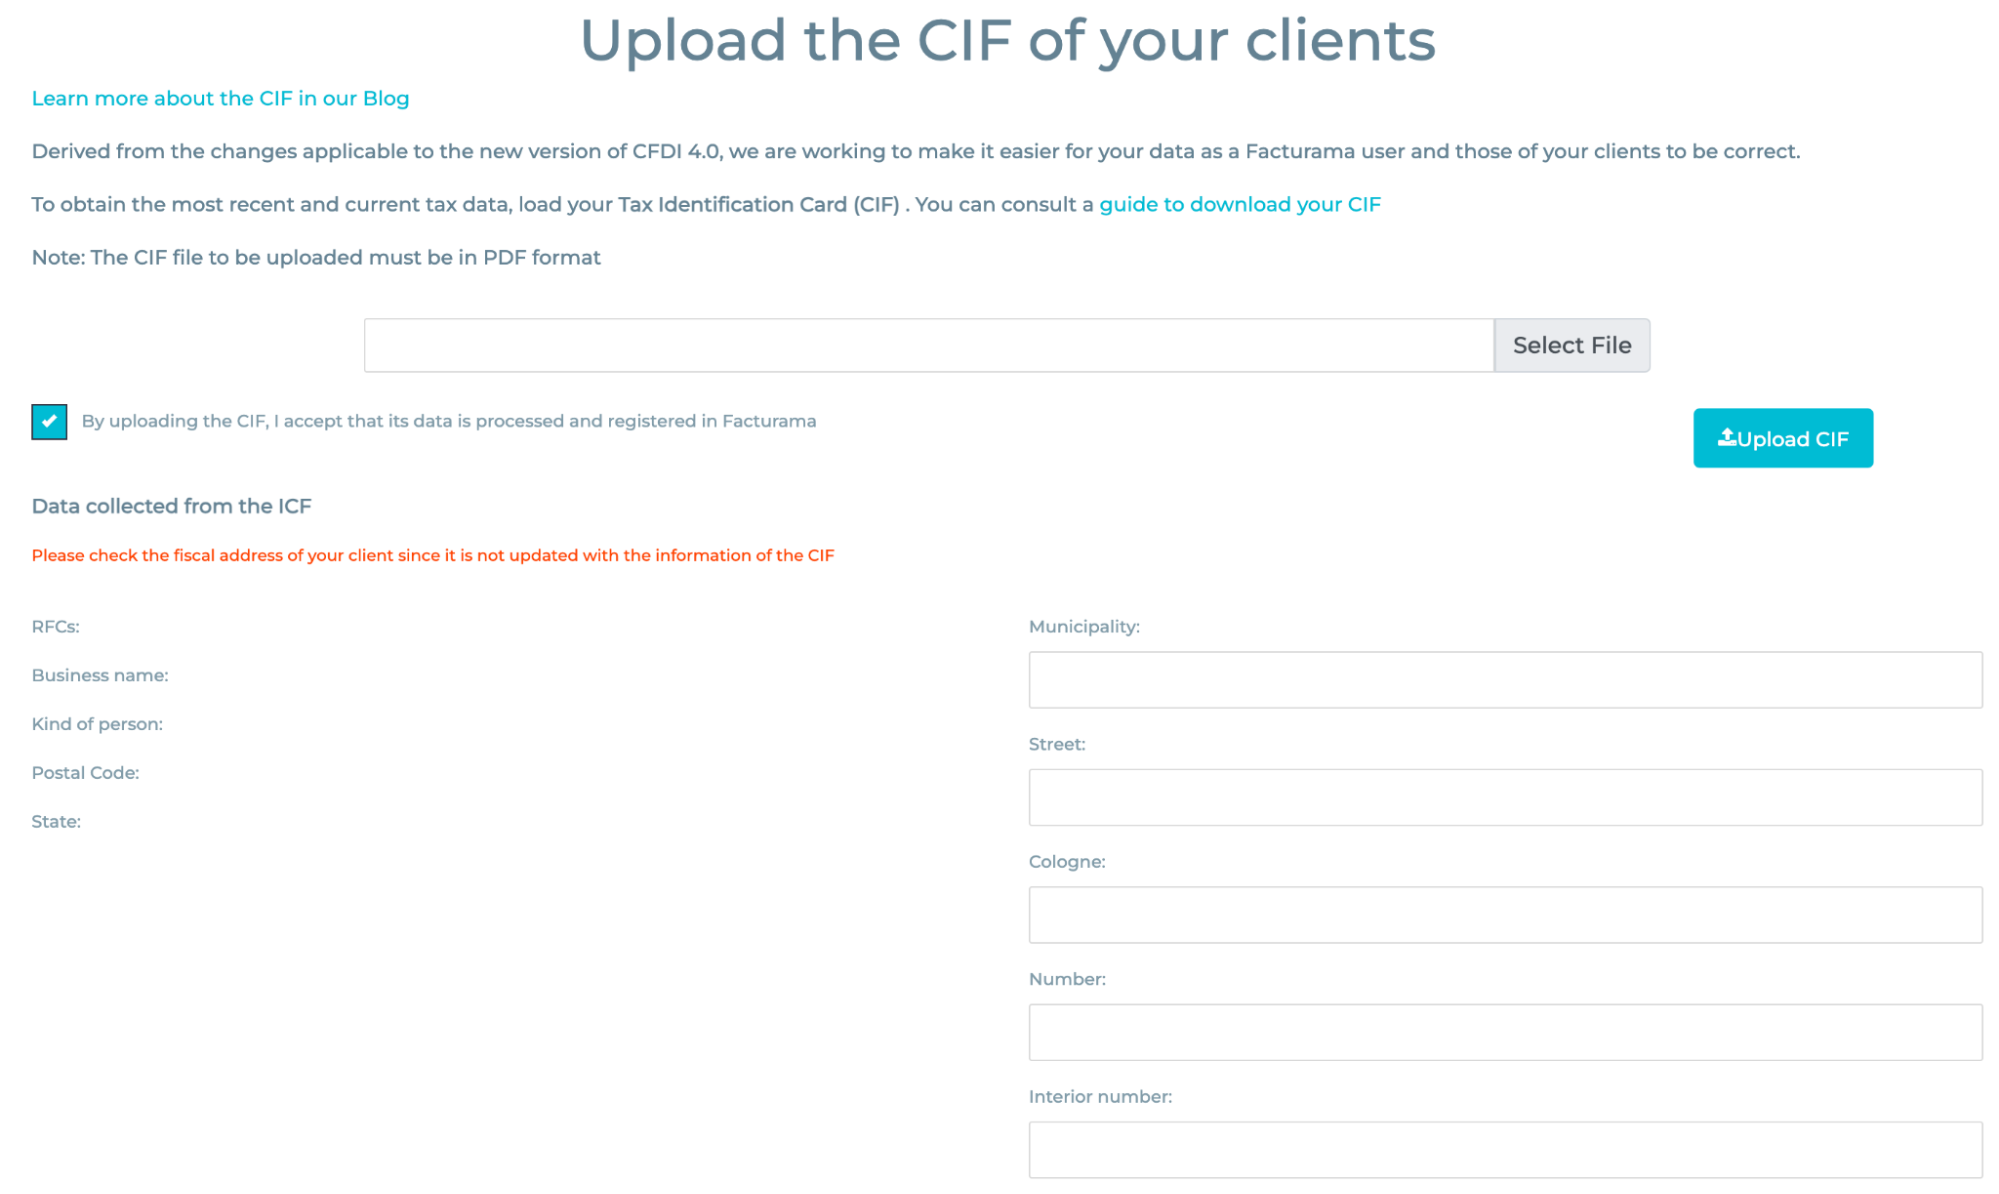 Upload Client CIF section with button to upload file.